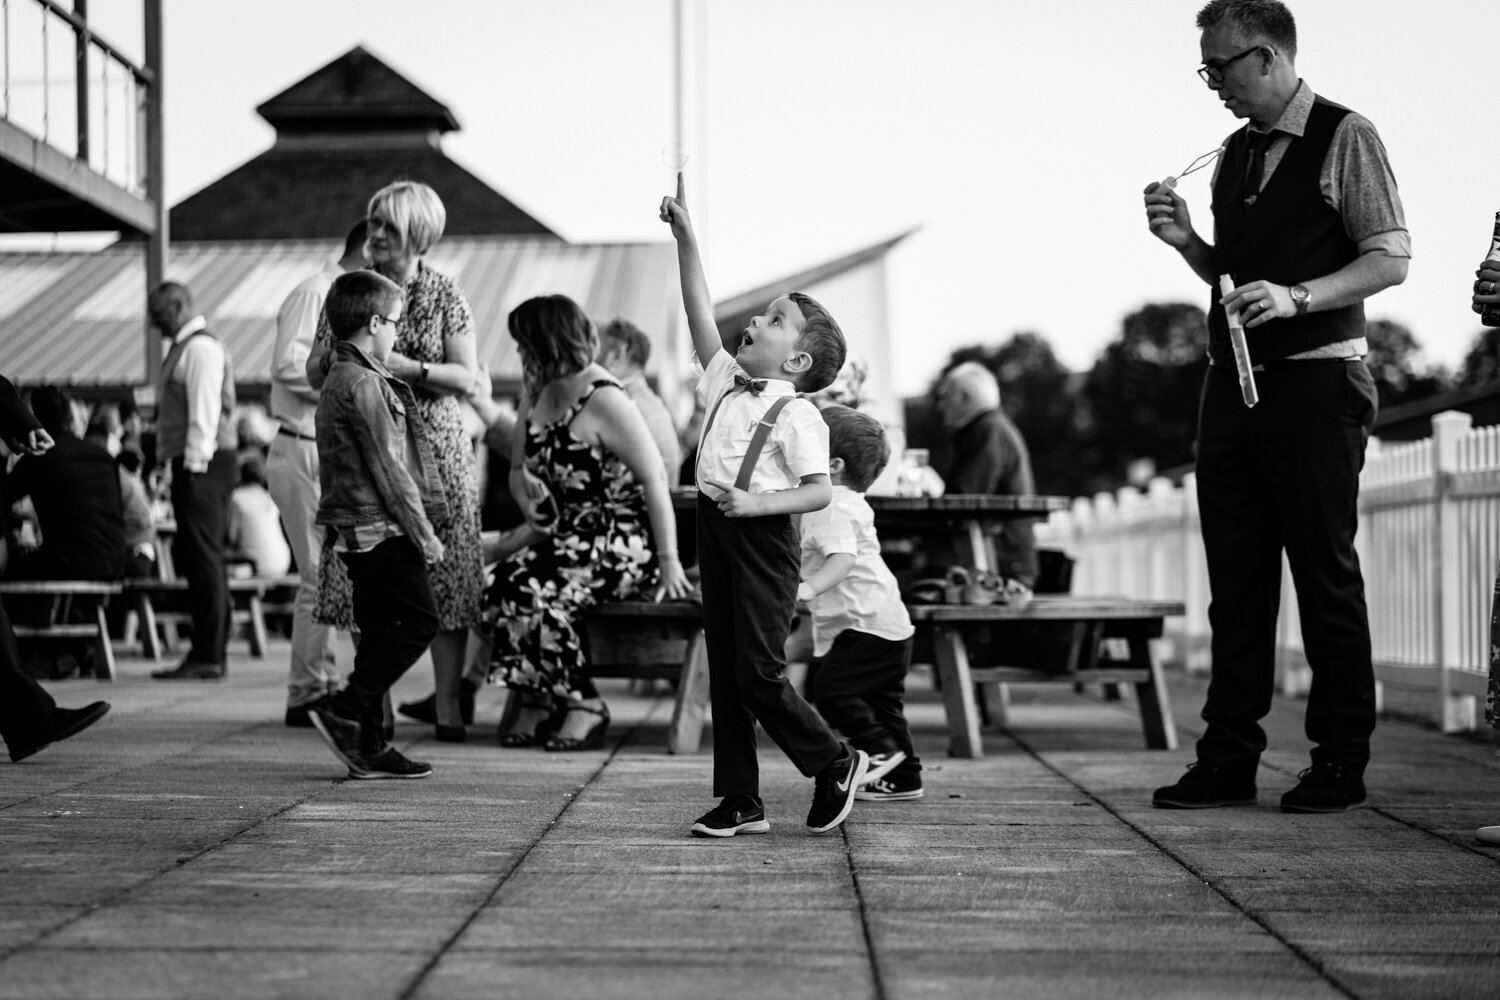 Children playing at wedding popping bubbles